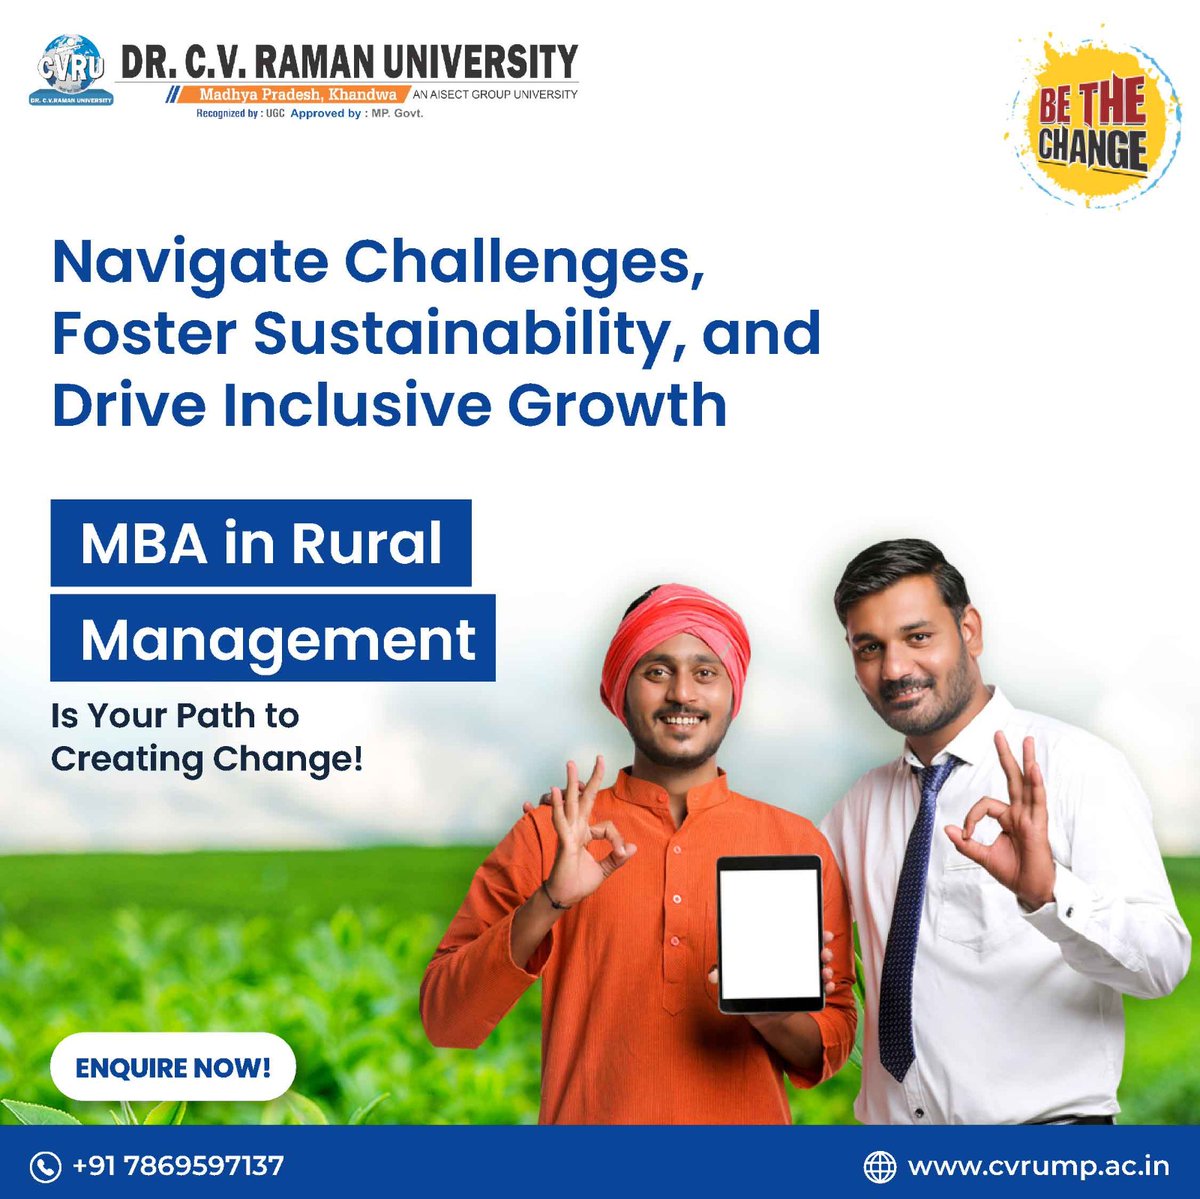 An MBA in Rural Management transforms and profoundly impacts the rural sector, unlocking unprecedented growth scope and endless opportunities. 

Prepare to pioneer positive change and thrive in the heart of rural development.

#MBA #RuralManagement #PositiveChange